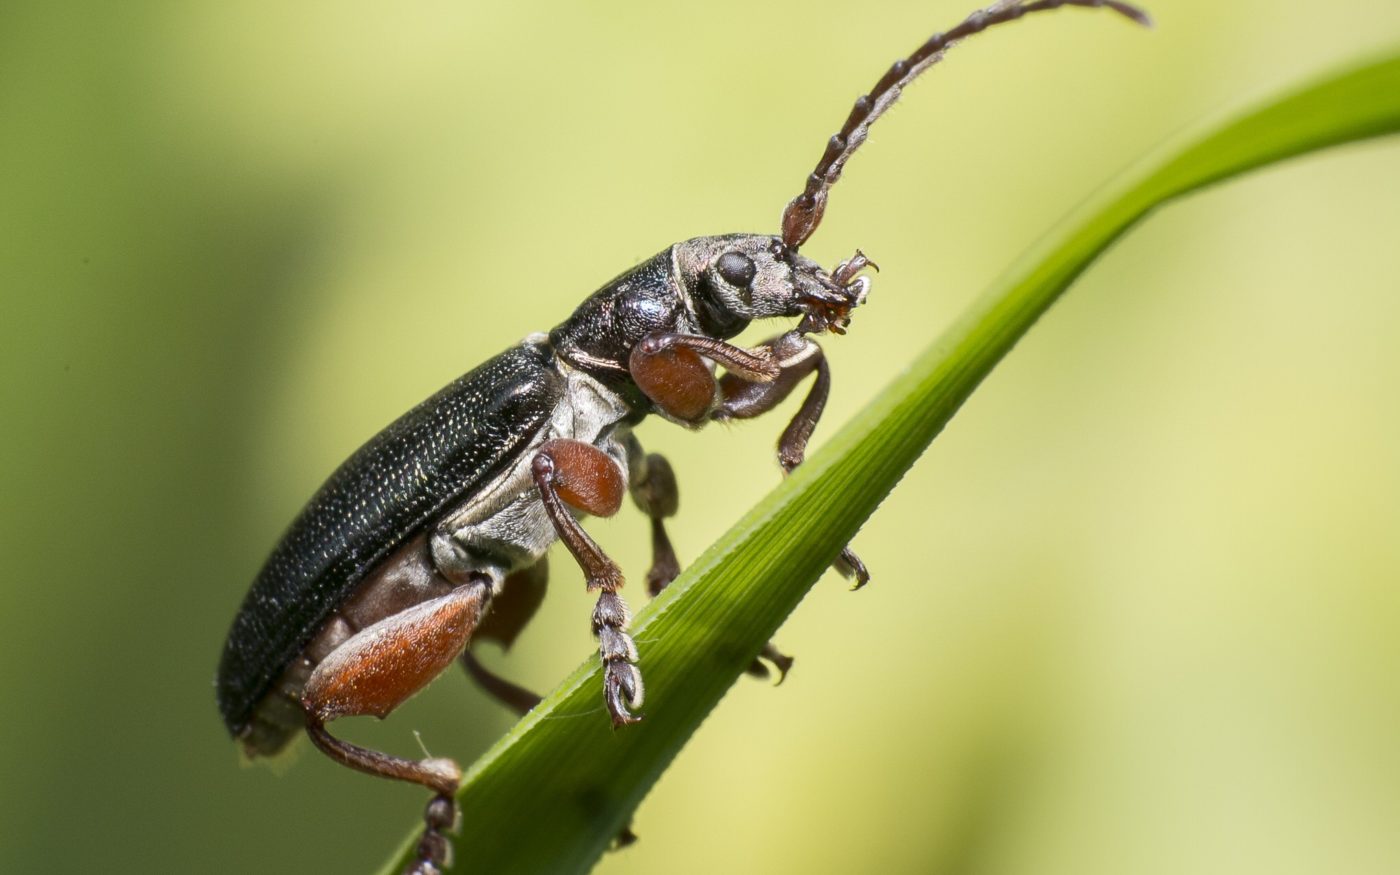 A reed beetle (Plateumaris sp.) of the beetle family Chrysomelidae. This is an uncommon species in the UK, though Woodwalton Fen provides a typical habitat for these reed-feeding insects.